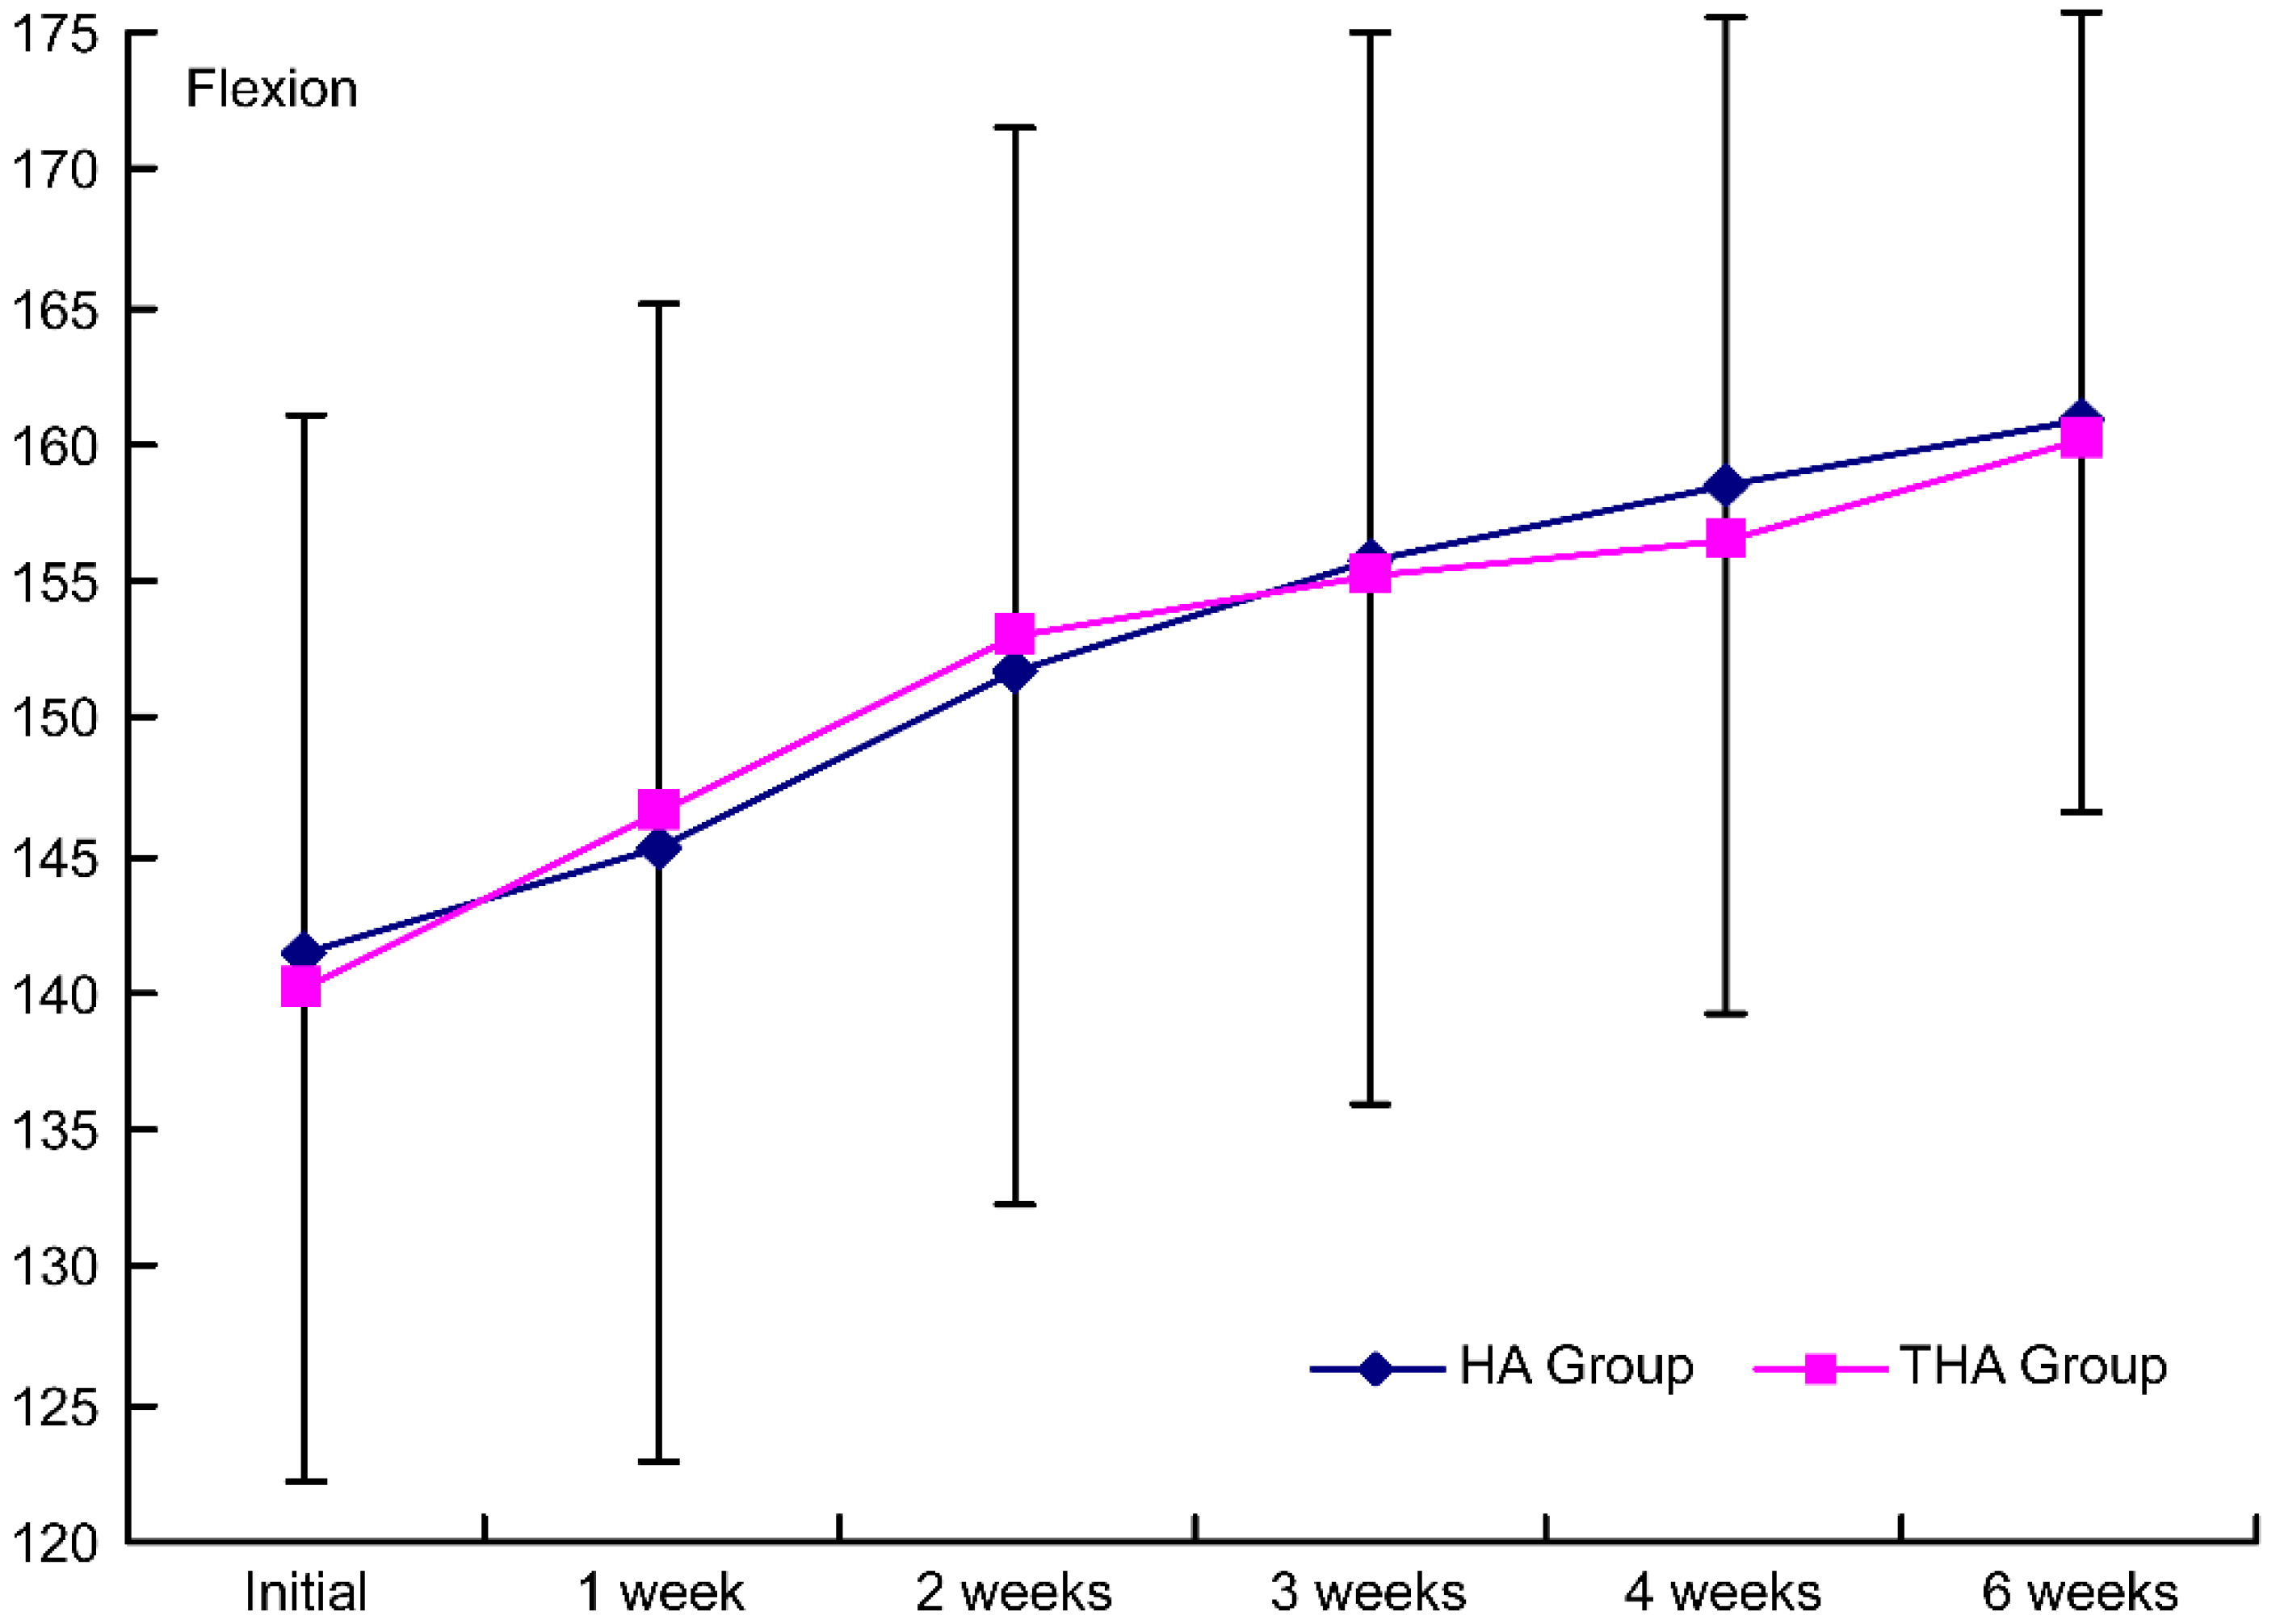 Intergroup comparison of the injection effects on flexion. HA group, hyaluronate group; THA group, hyaluronate plus tramadol group.